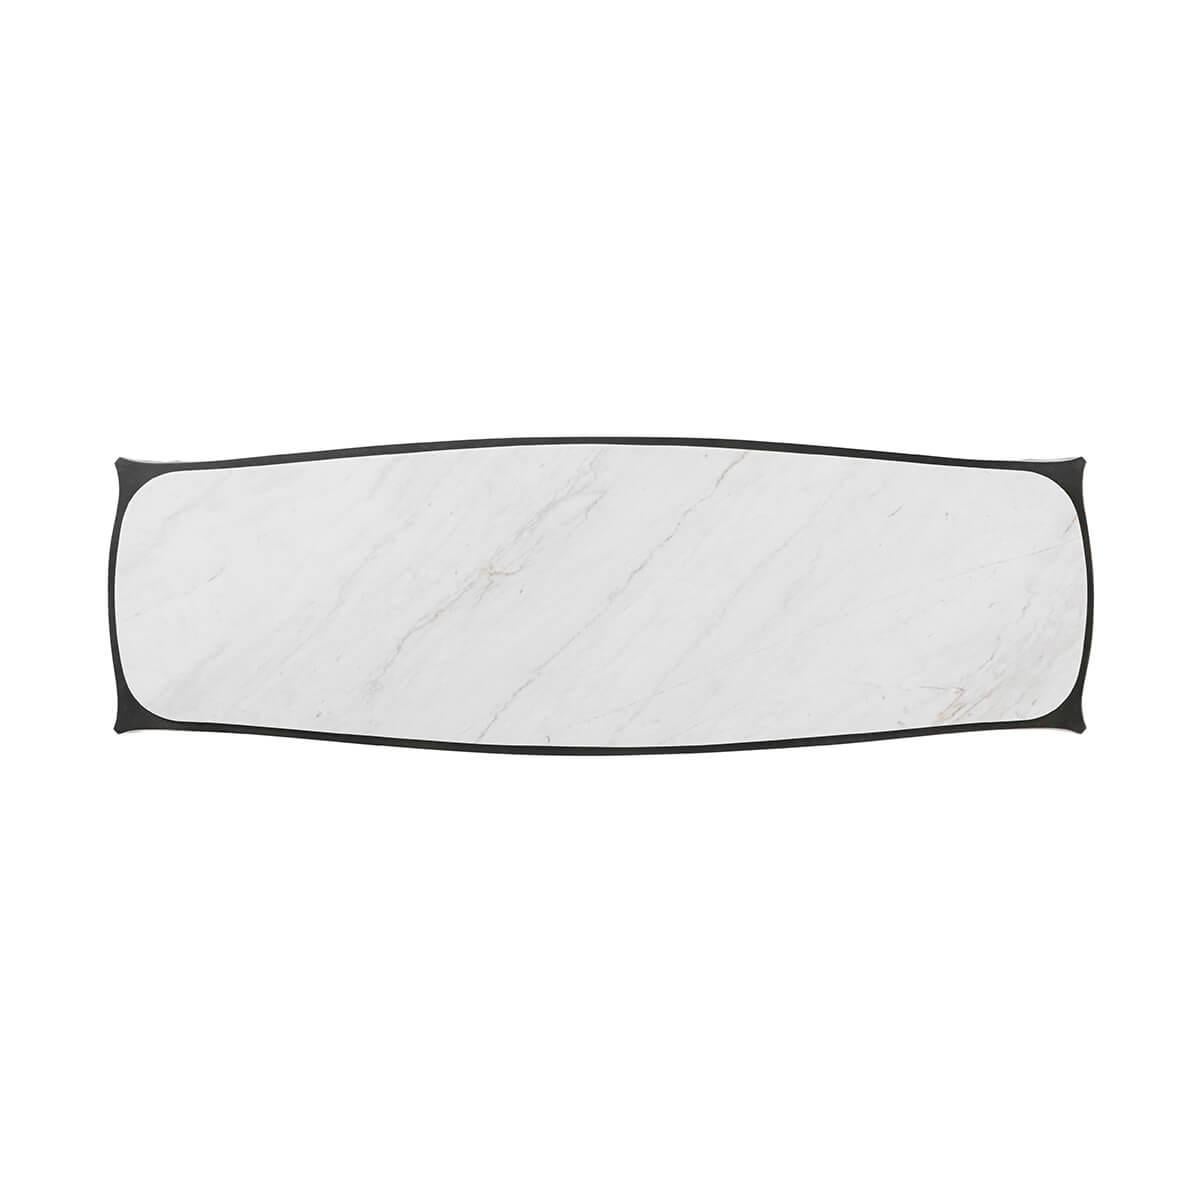 The raised marble top is set upon a shaped base with four organic sculptural legs, elegantly featured in a dark finished metal.

Dimensions: 49.5